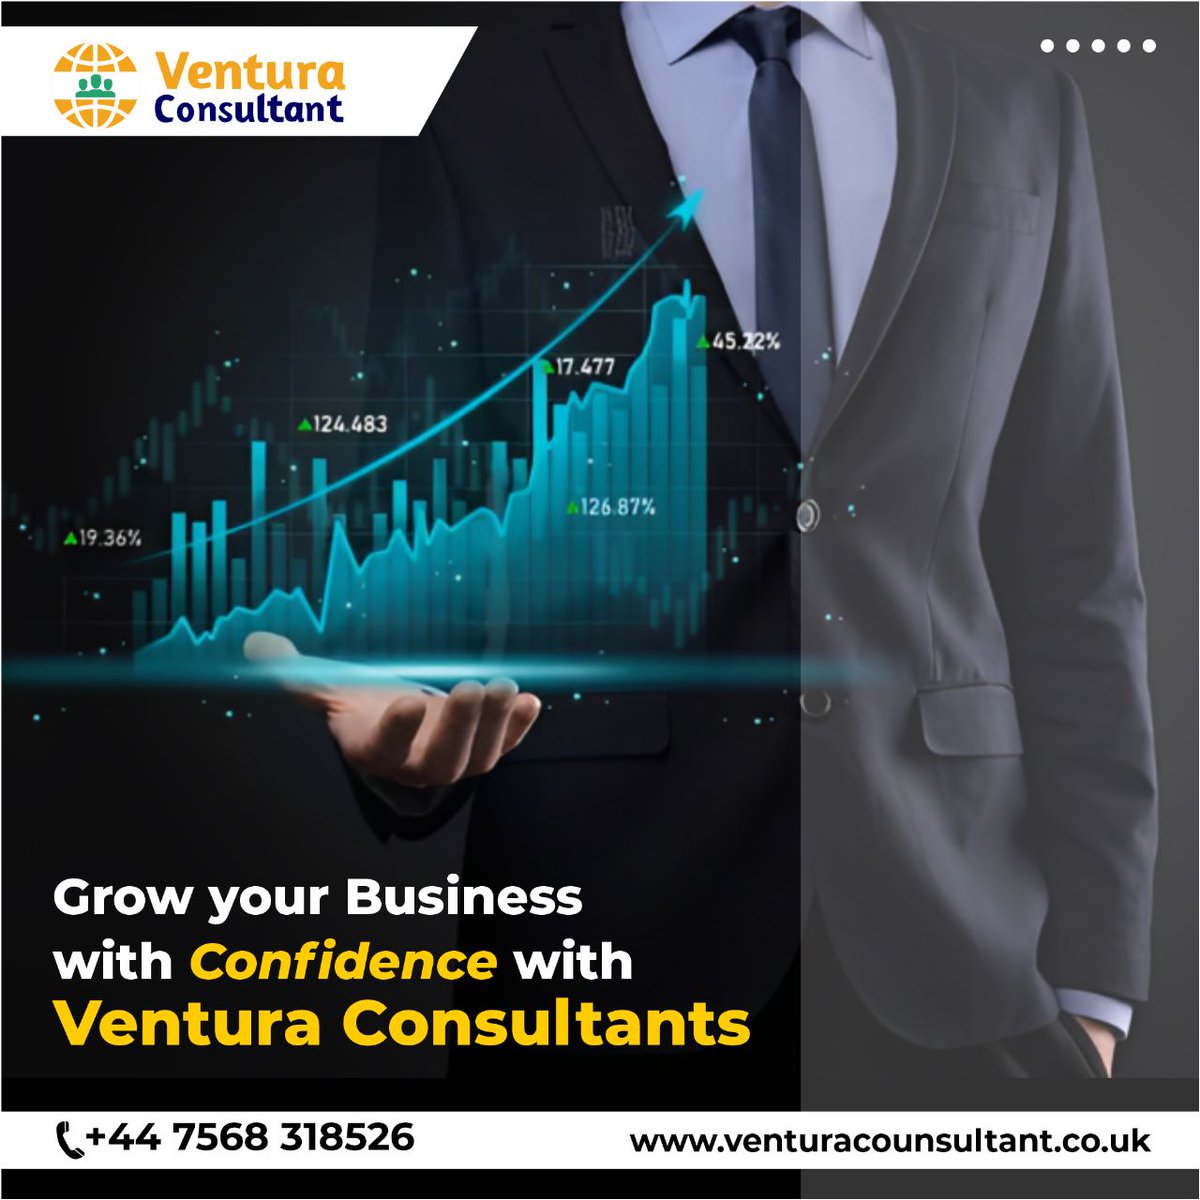 At Ventura Consultant, we offer top-notch business solutions to help your company overcome any financial or strategic challenges. 
Contact us for more information: +44 7568 318526   
Or visit us at: venturaconsultant.co.uk

#accountingservices #consultantbusiness #consultingfirms